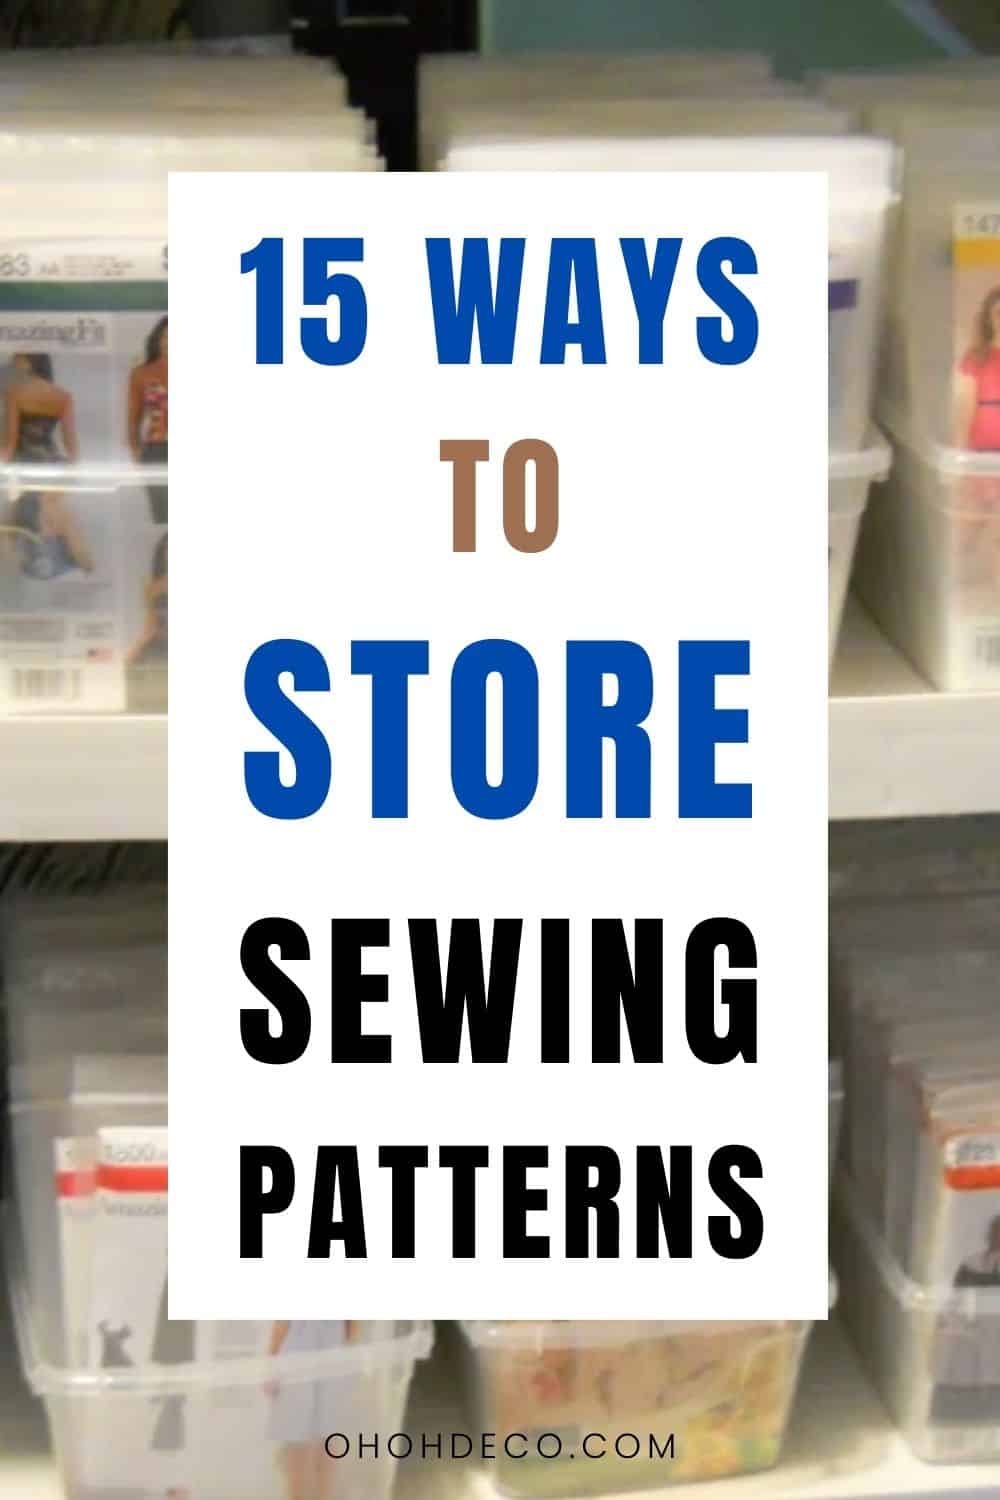 15 ways to store sewing patterns